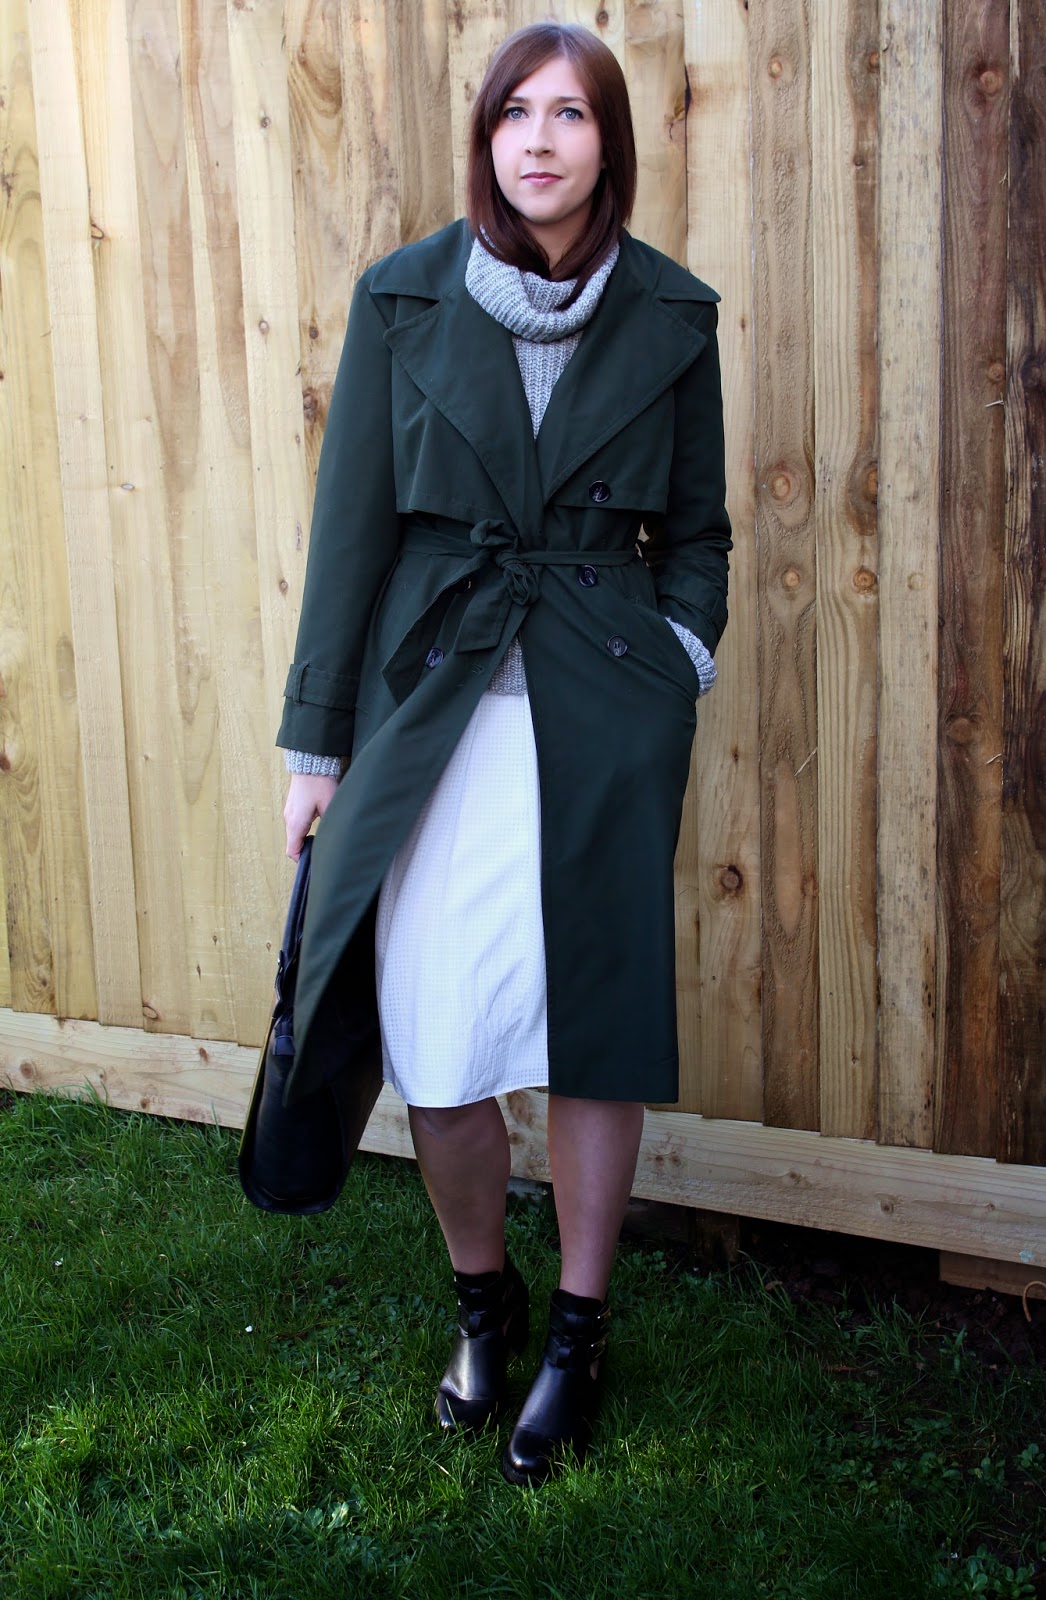 asseenonme, wiw, whatimwearing, primark, newlook, shoezone, ootd, outfitoftheday, ootd, lookoftheday, lotd, trenchcoat, fbloggers, fblogger, fashion, fashionbloggers, fashionblogger, whiteskirt, winterfashion, rollneckjumper